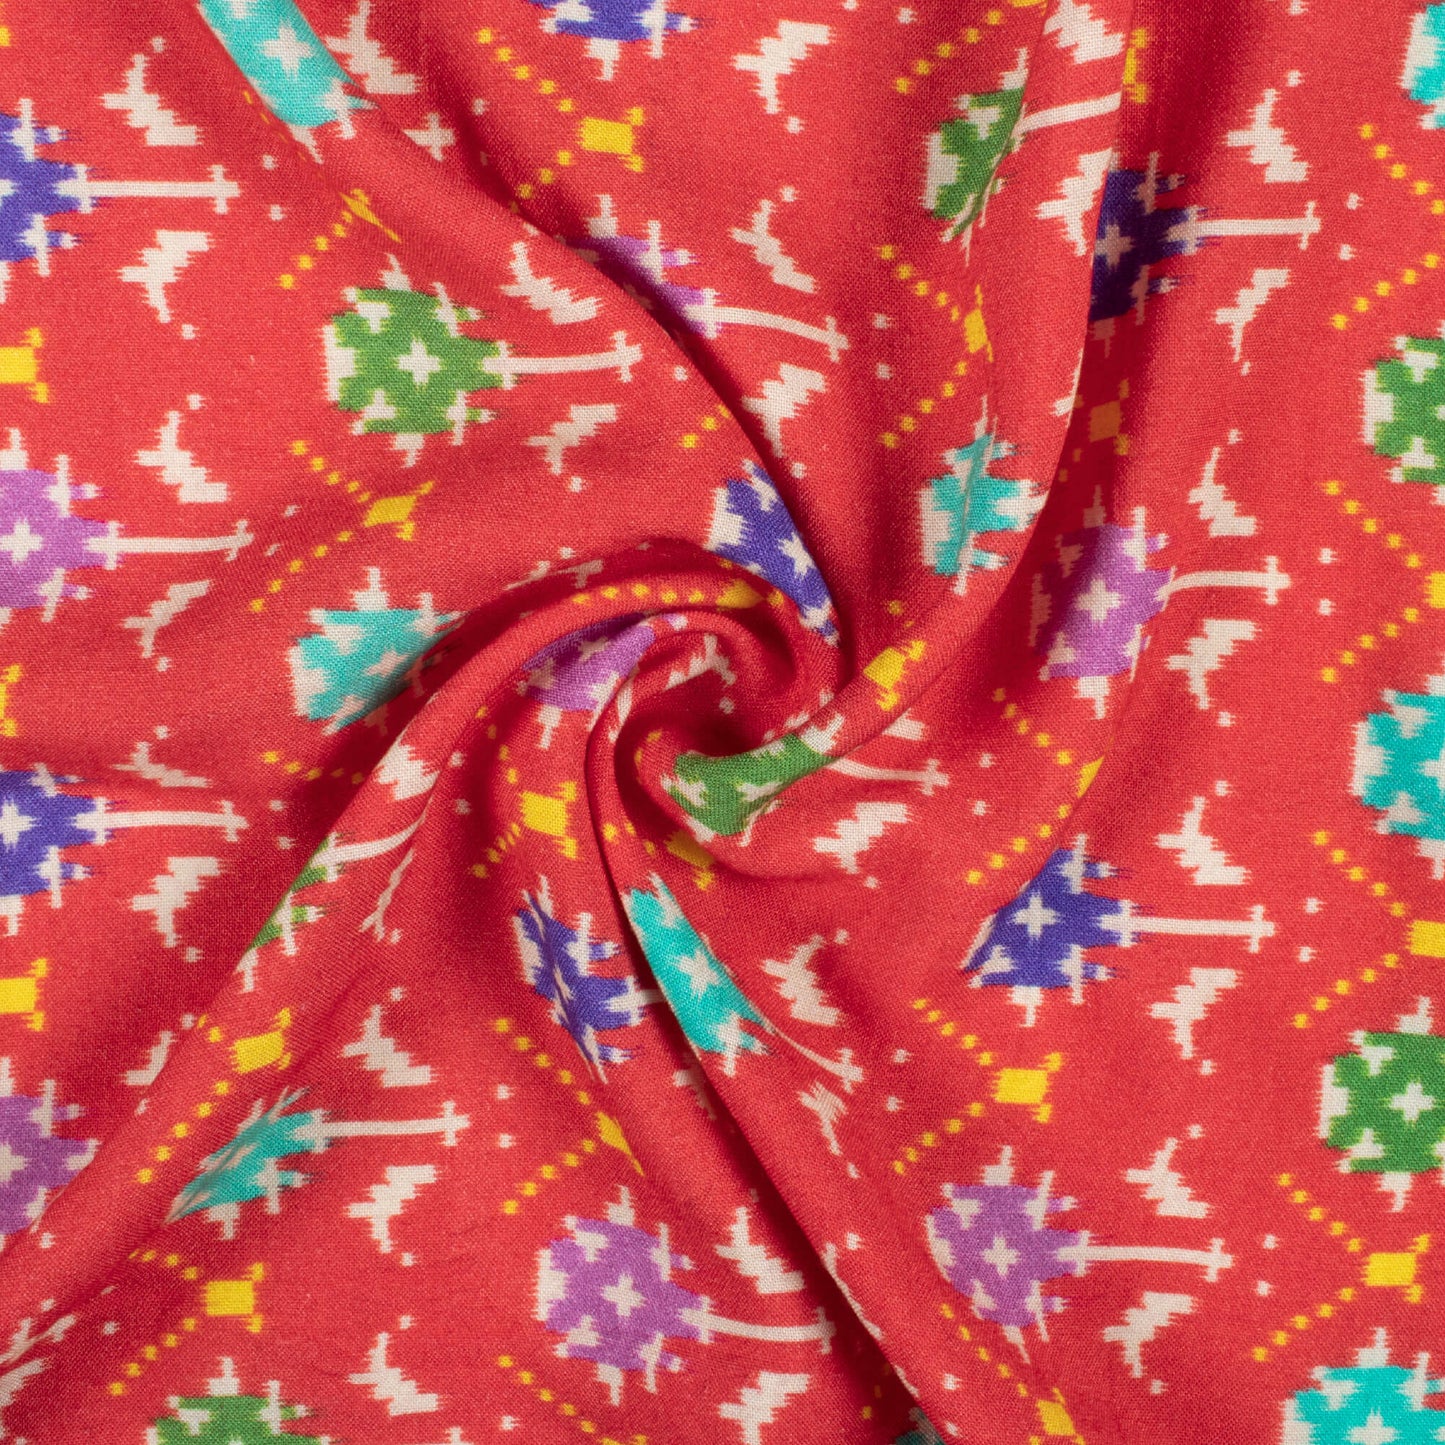 Vermilion Red And Blue Patola Pattern Digital Print Viscose Rayon Fabric (Width 58 Inches)